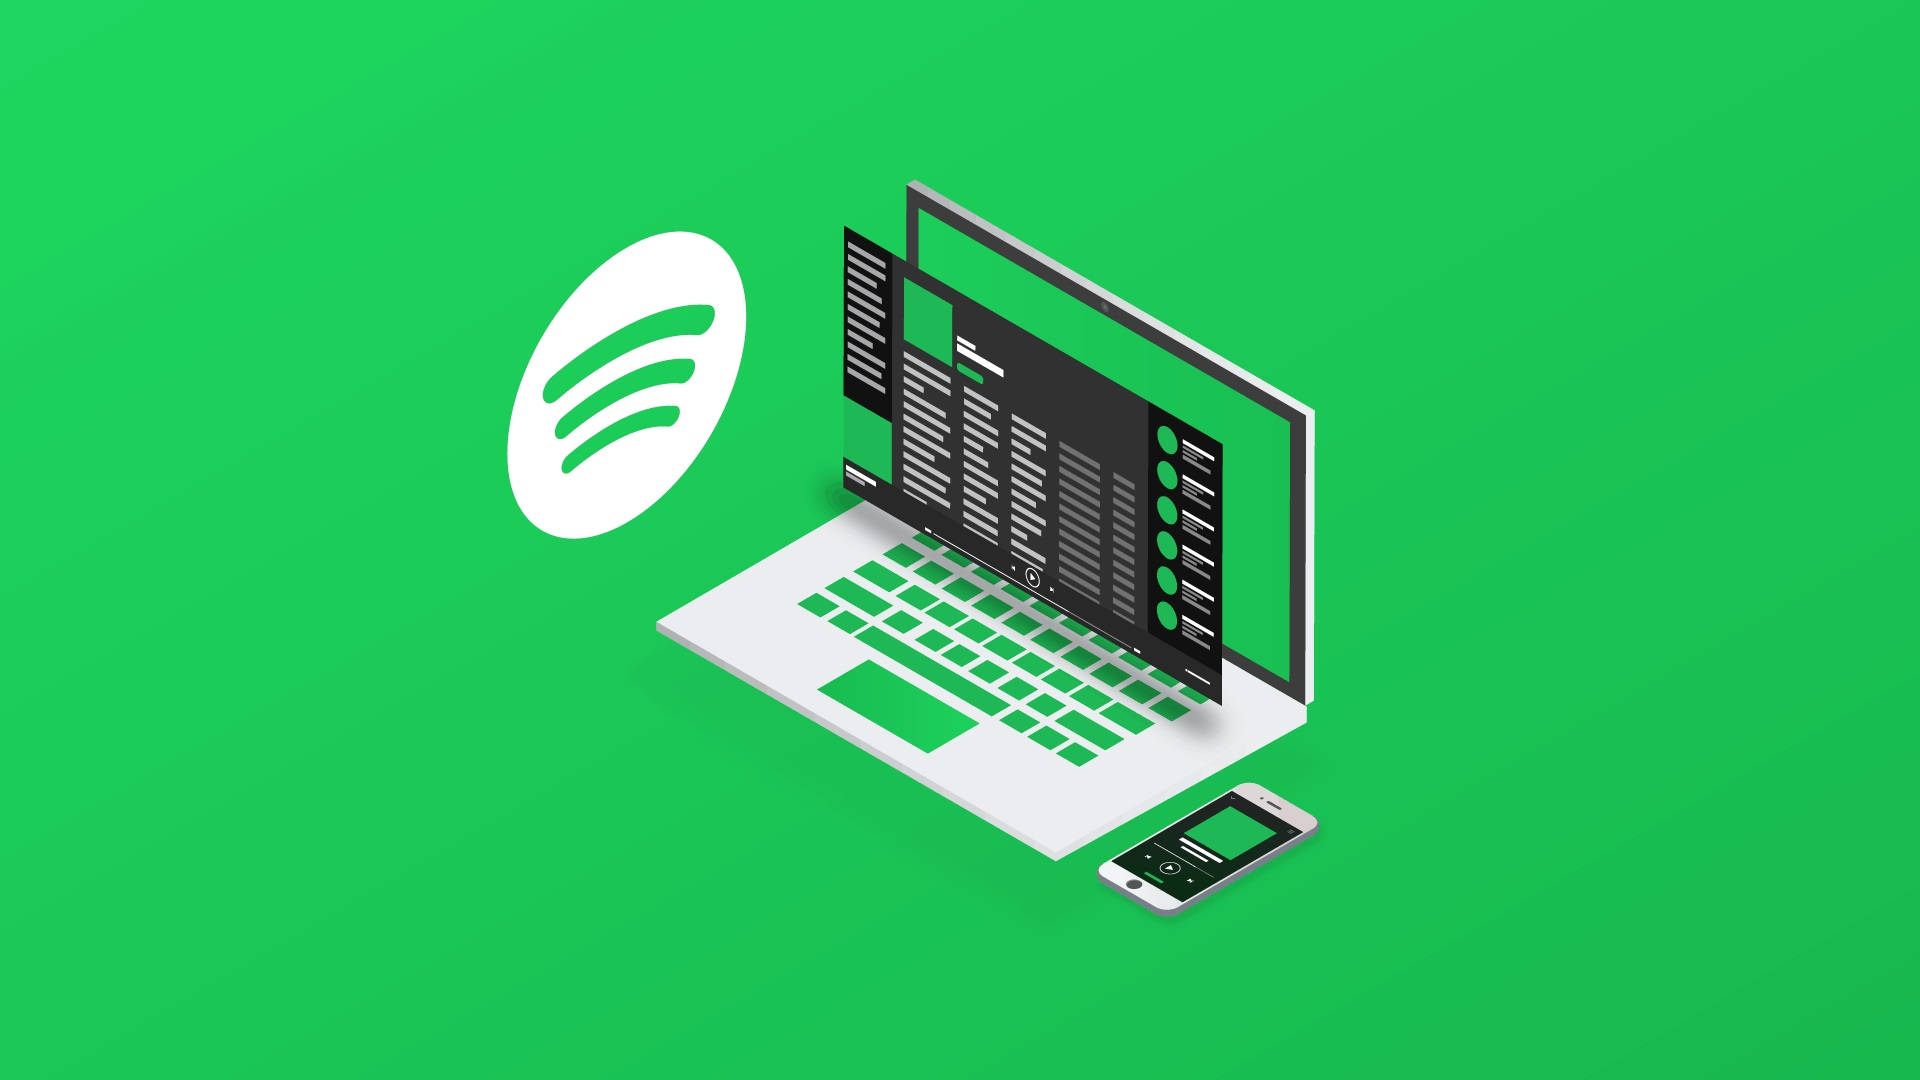 Spotify Vector Art Background